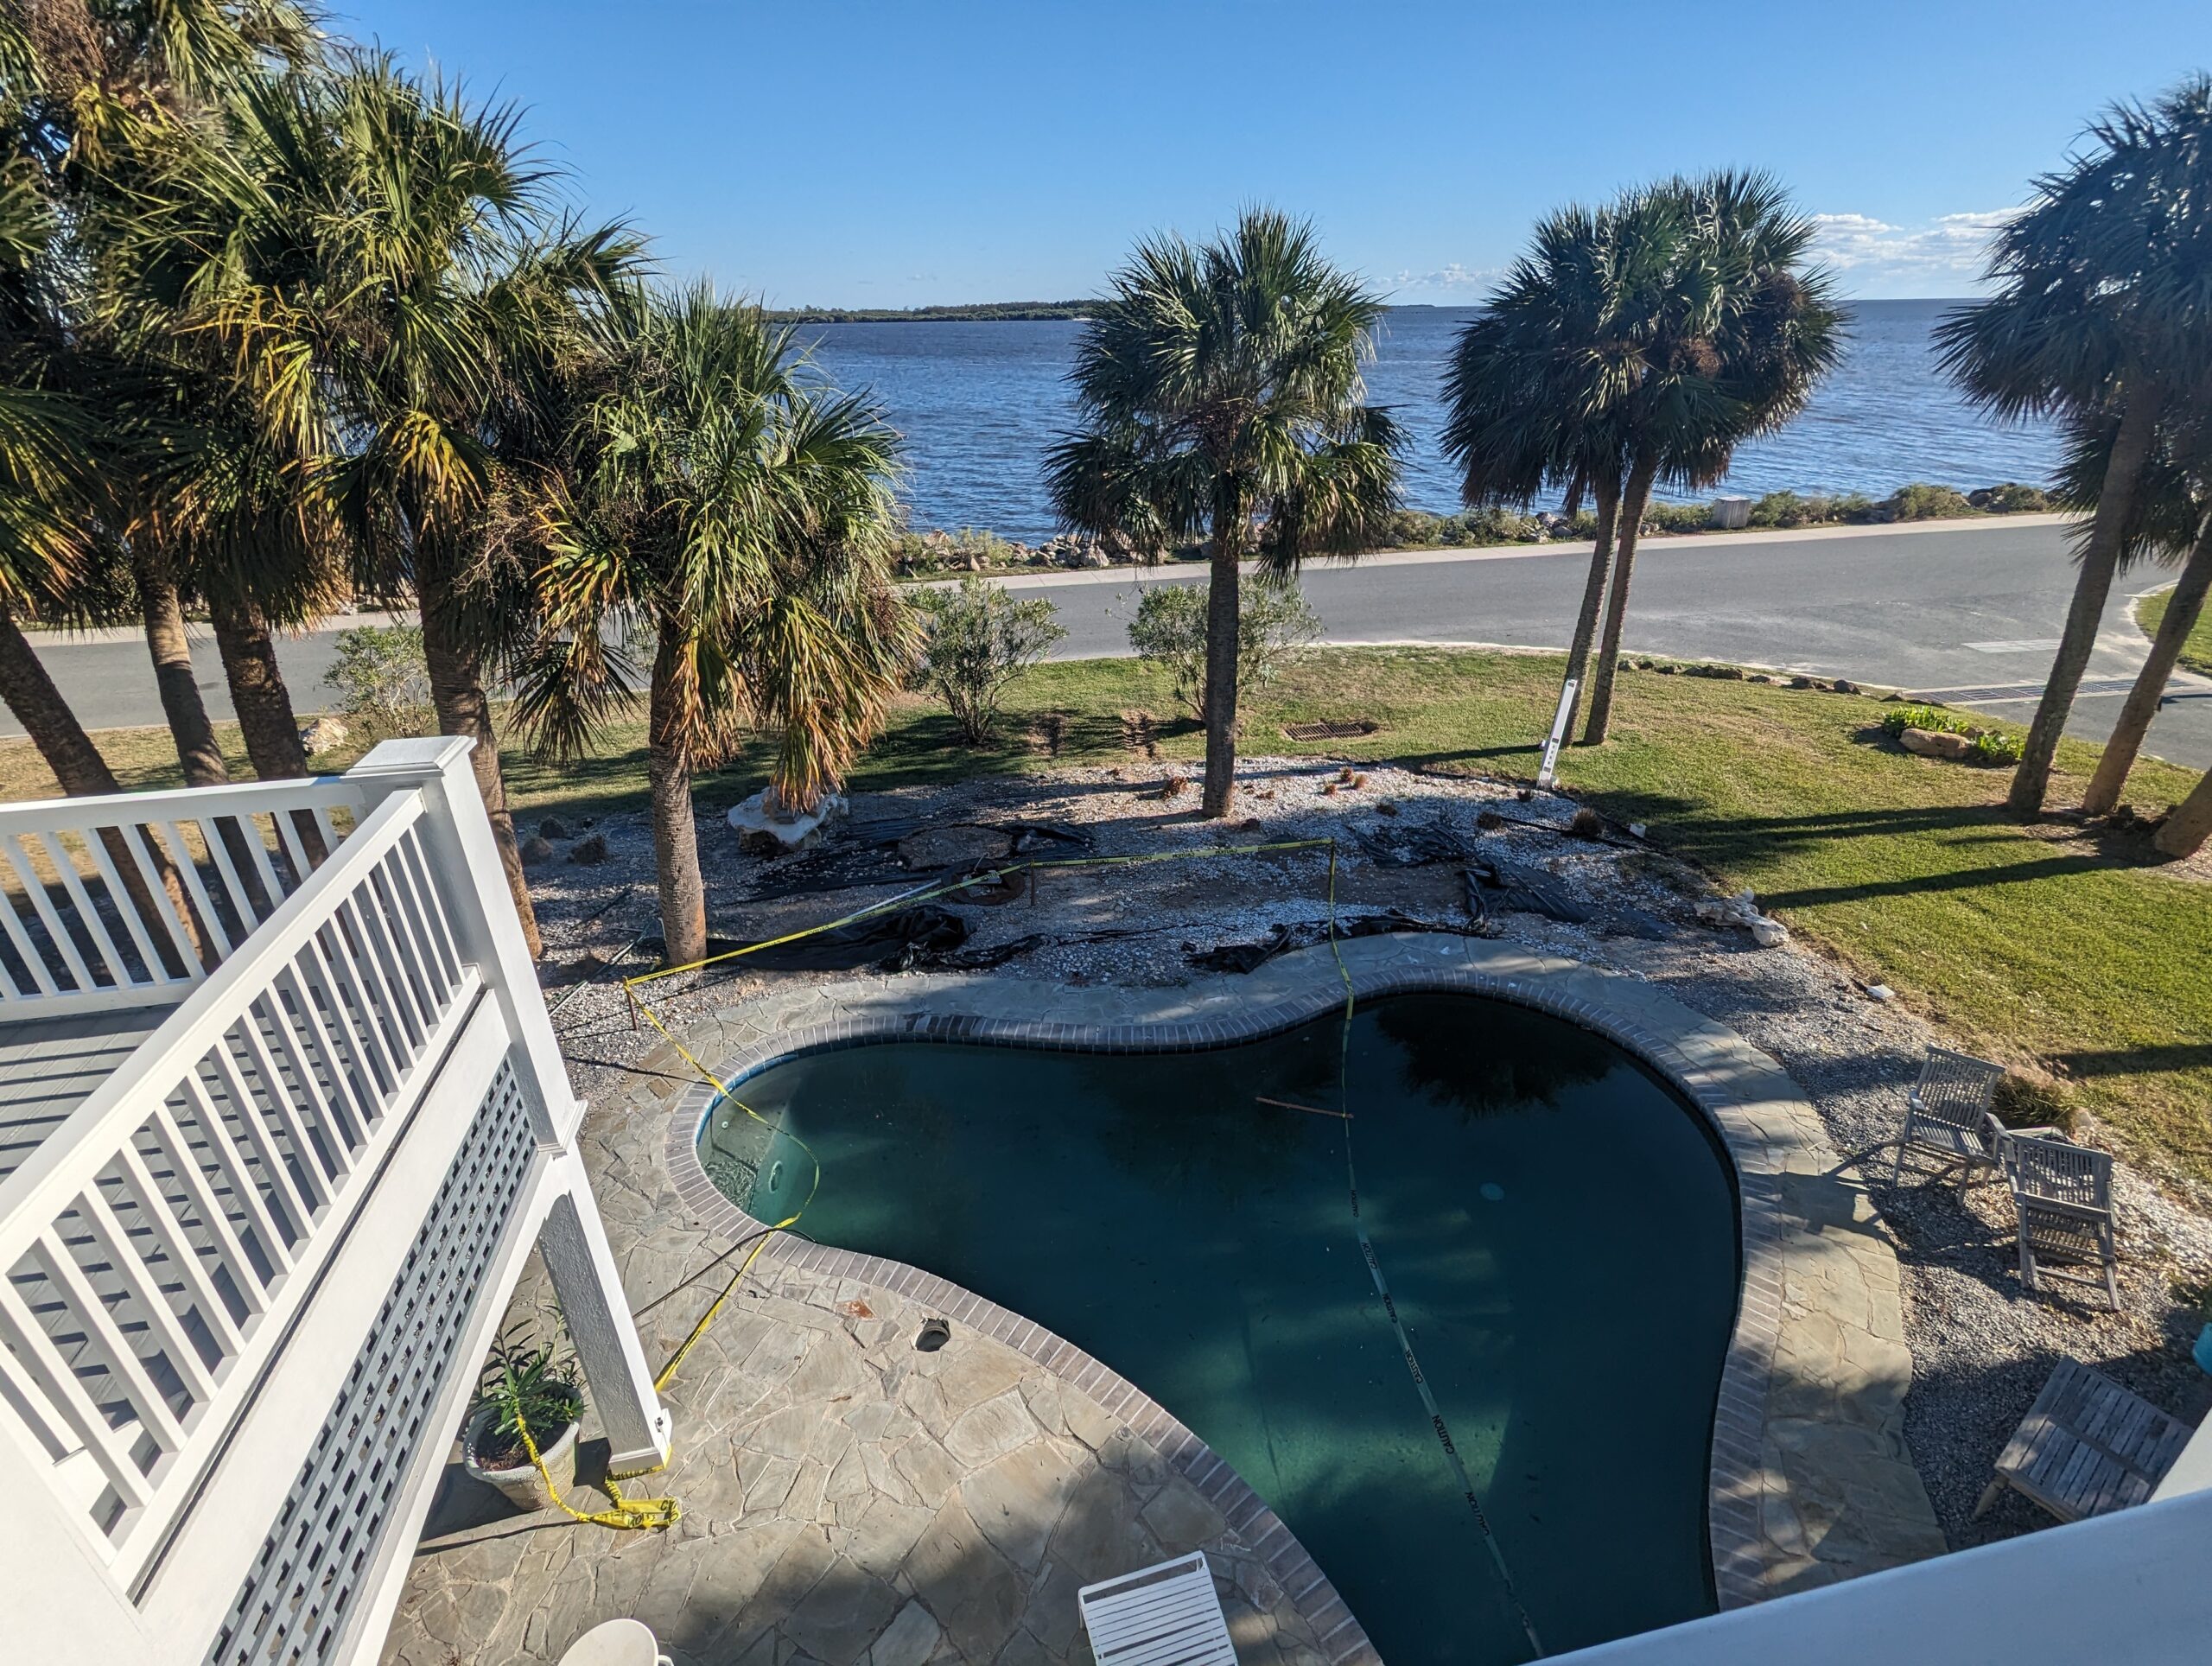 “Leak-Proof Your North Central Florida Pool: Great Pool Builders Partner With The Best Swimming Pool Leak Detection Company – Aquatrace!”